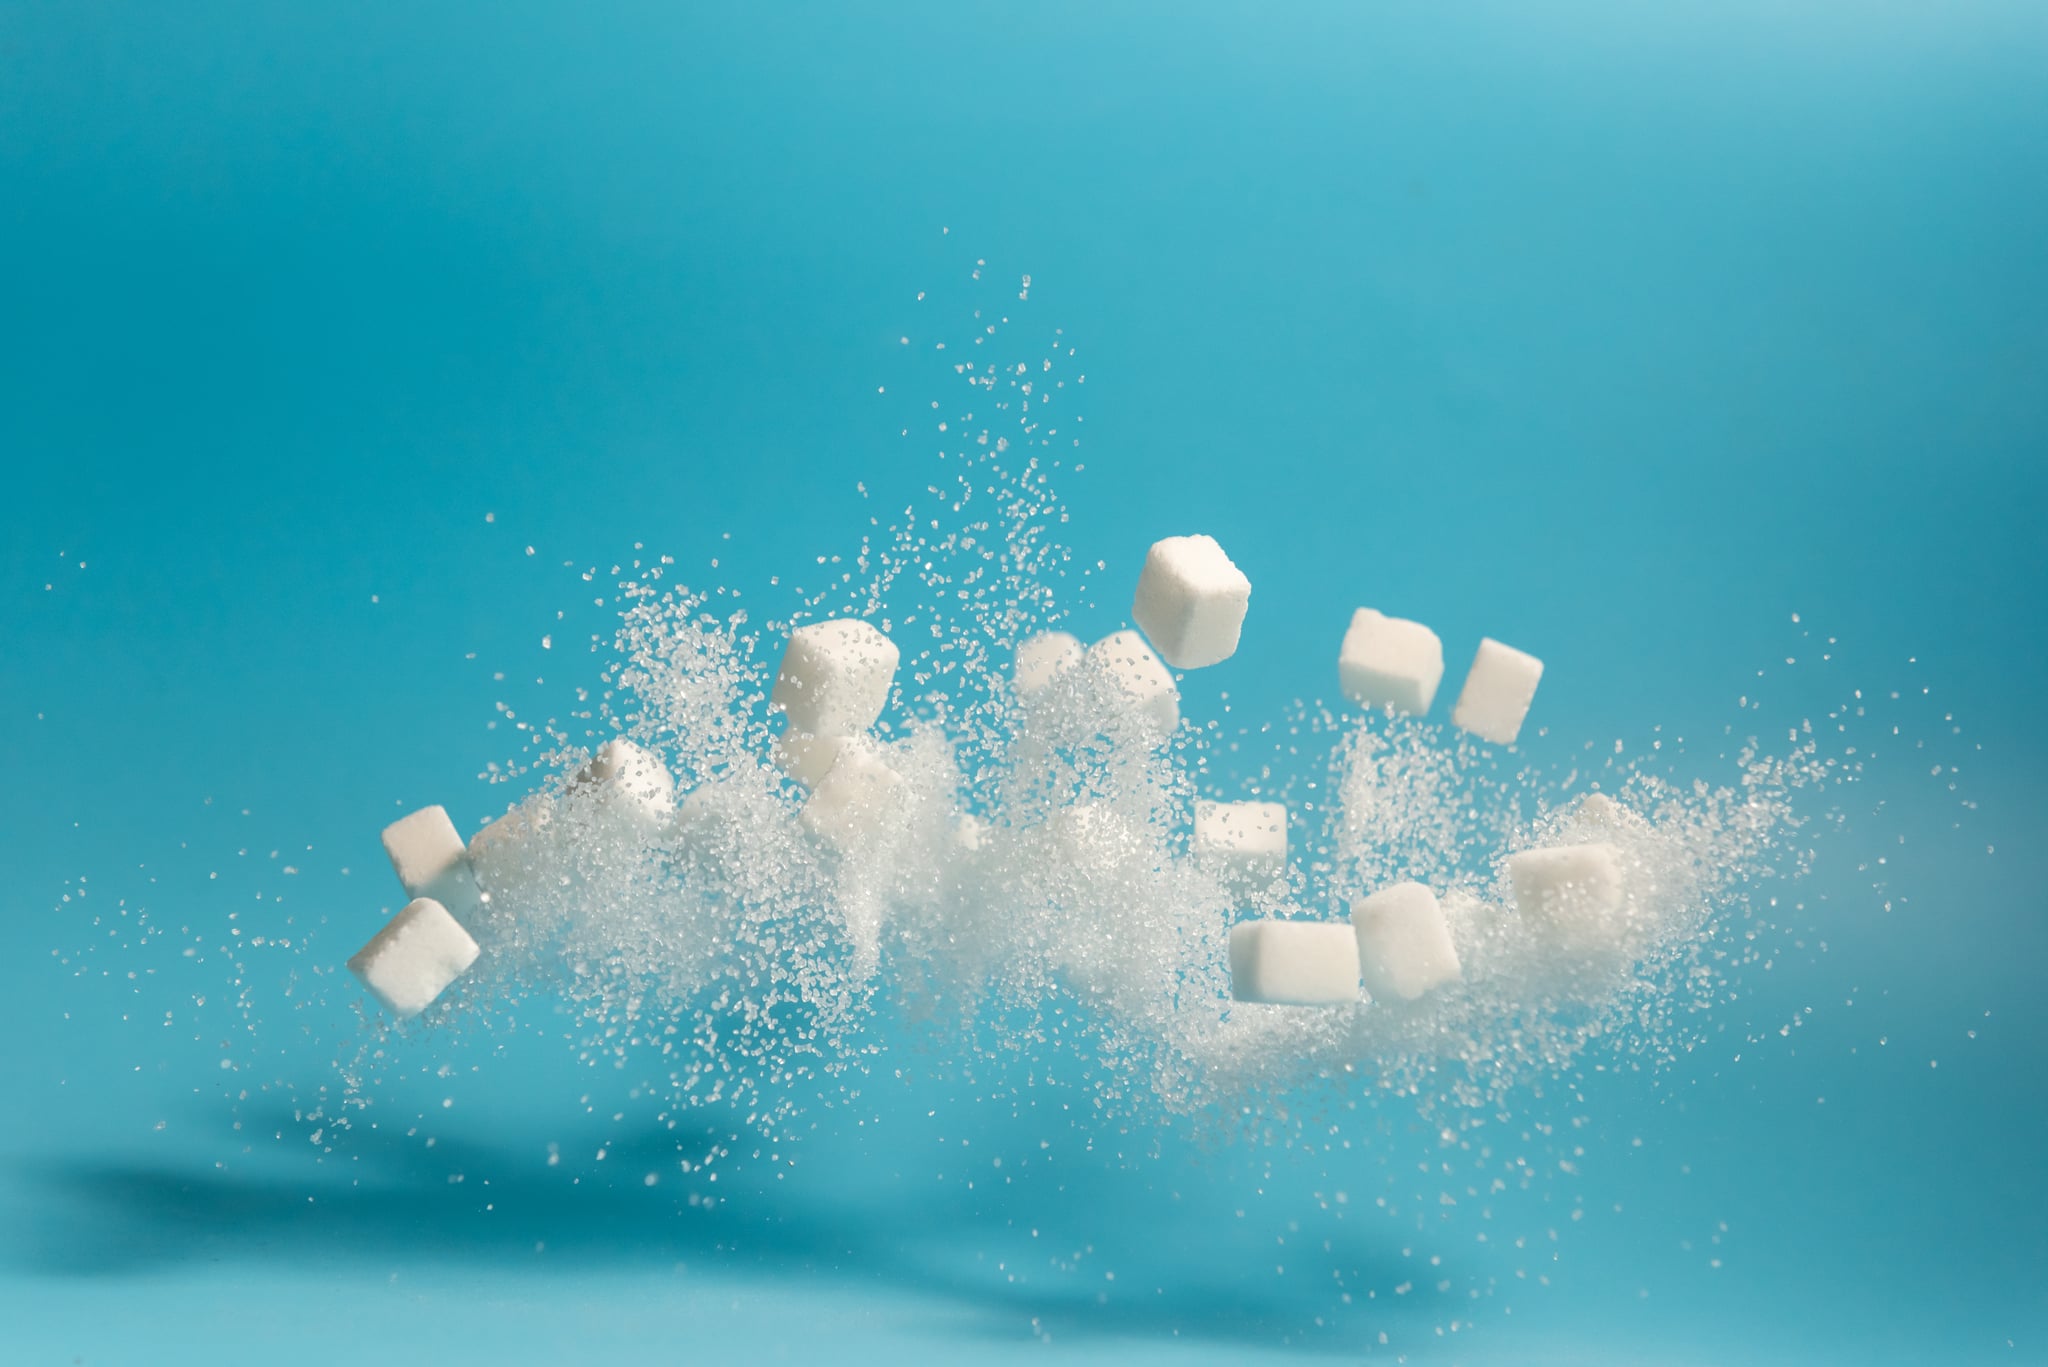 Falling sugar cubes and sugar to symbolize artificial sweetener: is it bad for you?